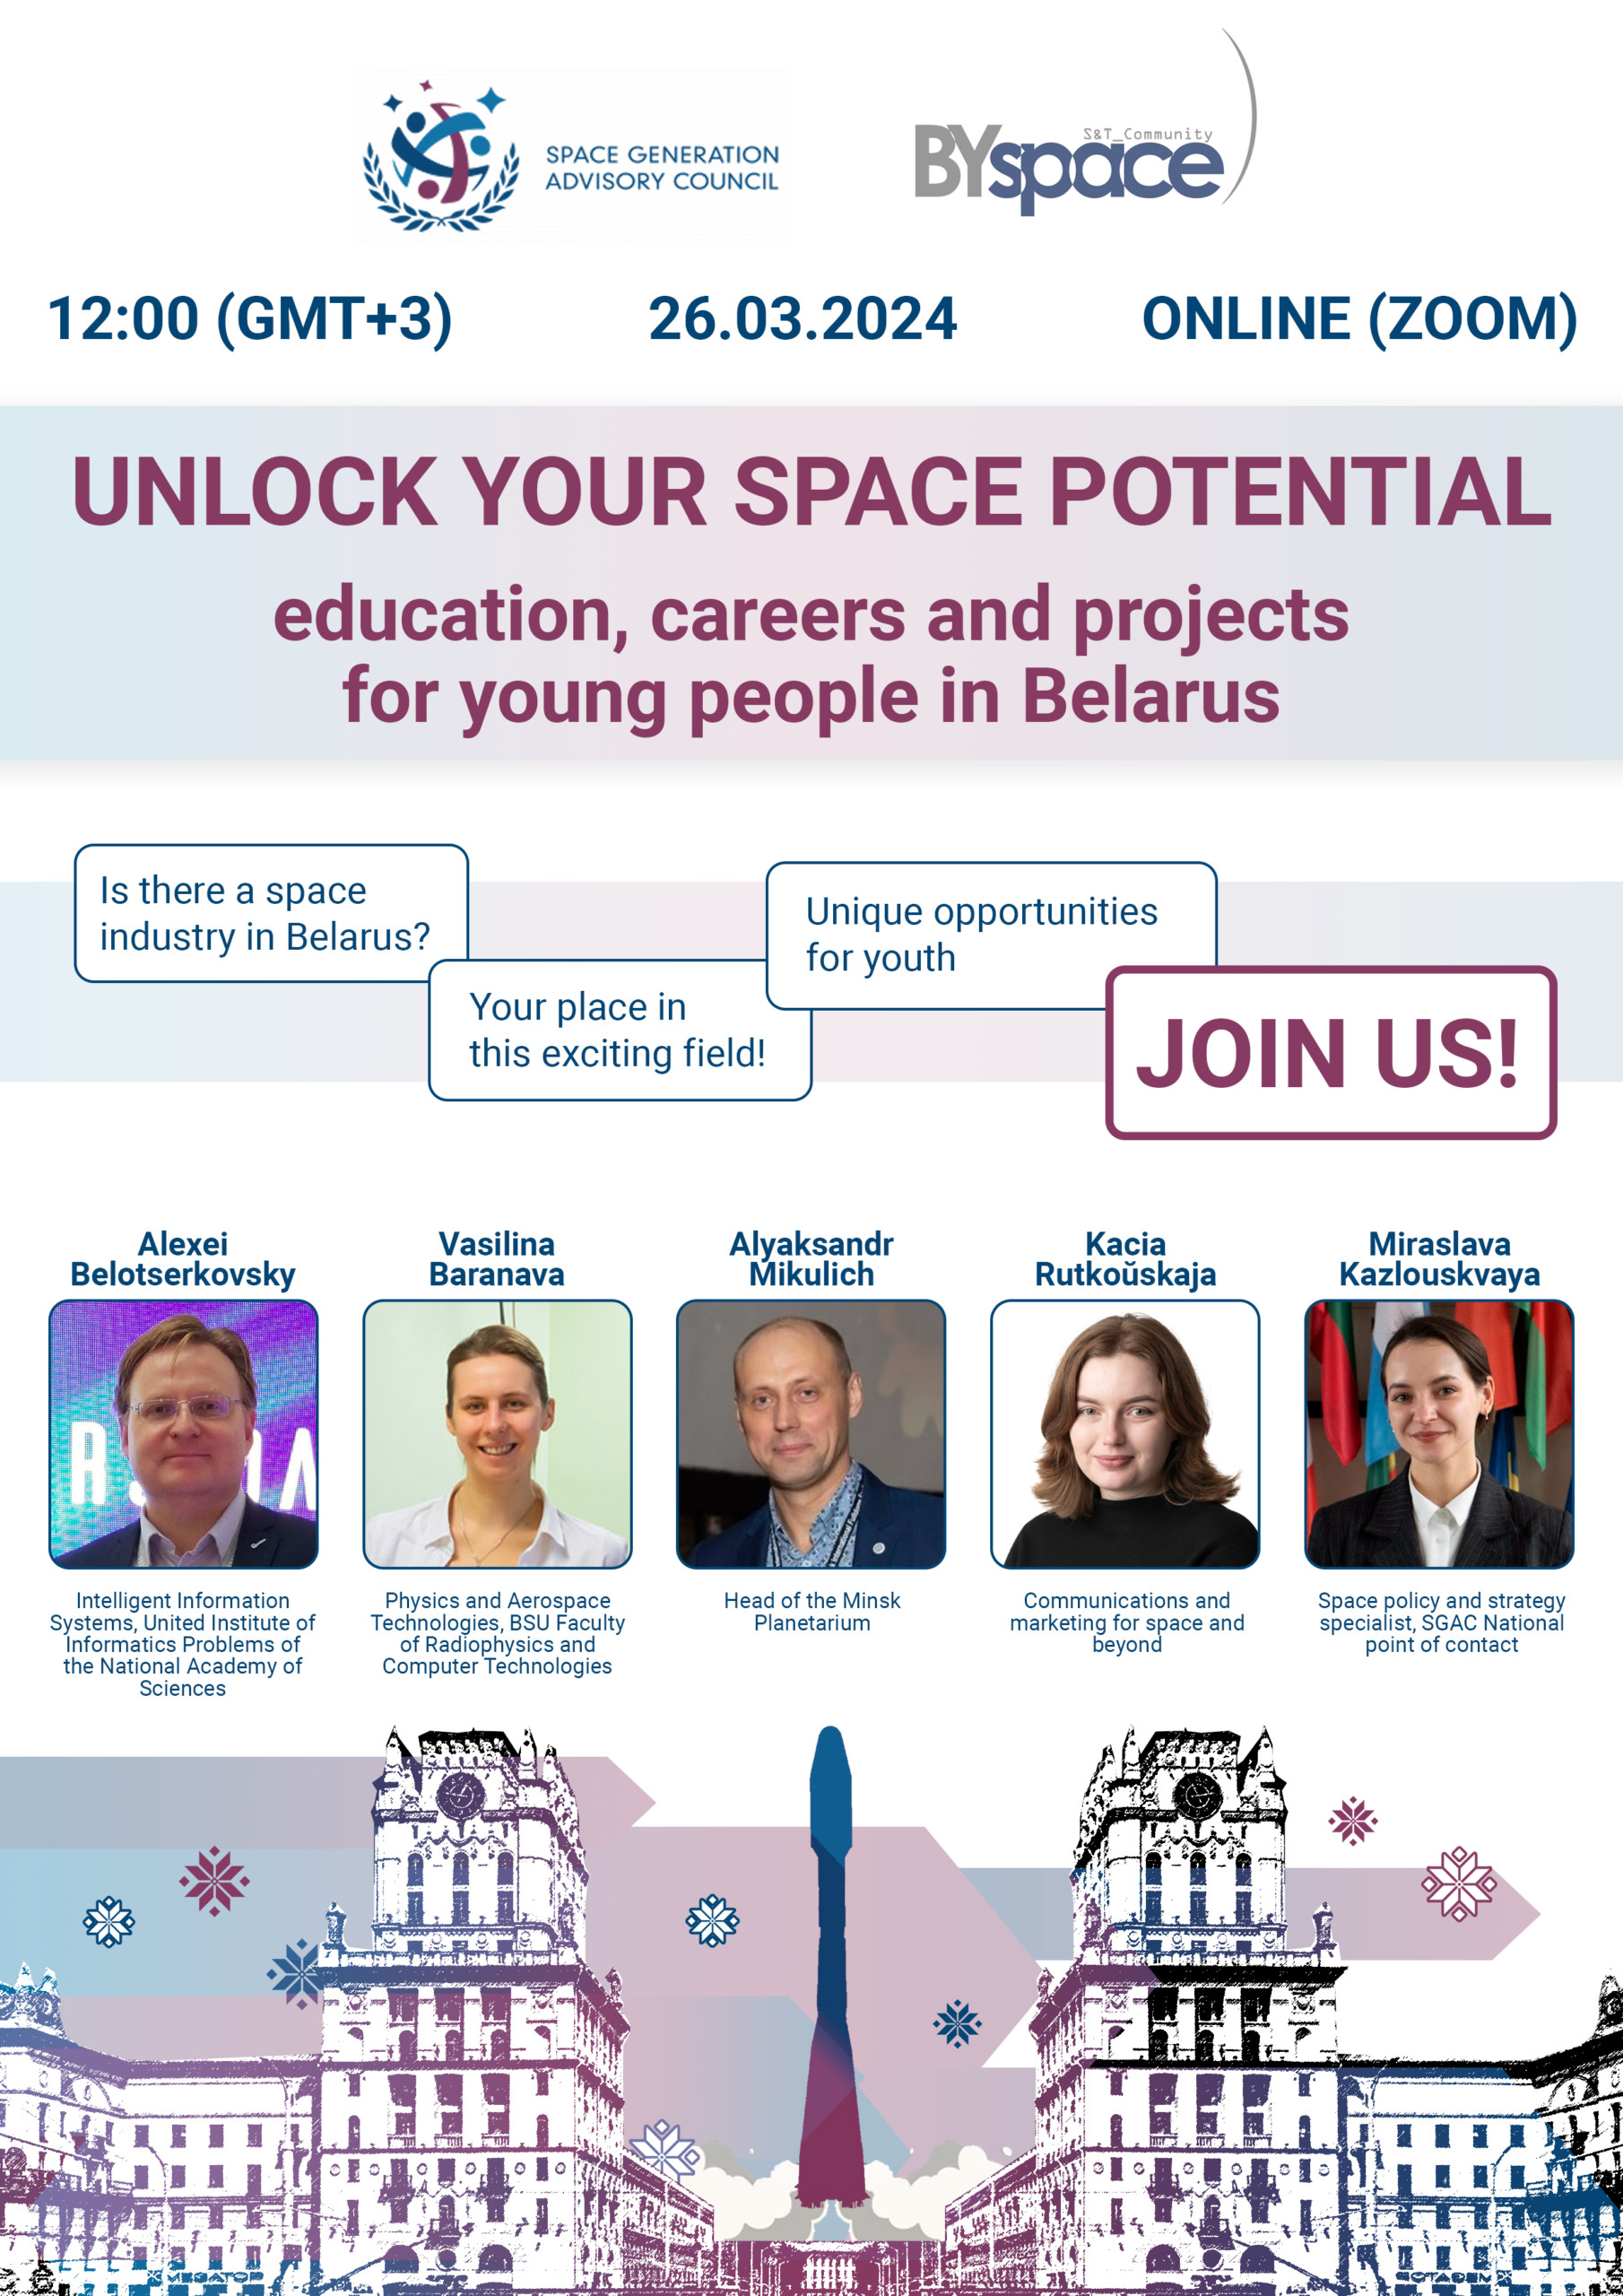 Unlock your space potential: education, careers and projects for young people in Belarus - Space Generation Advisory Council